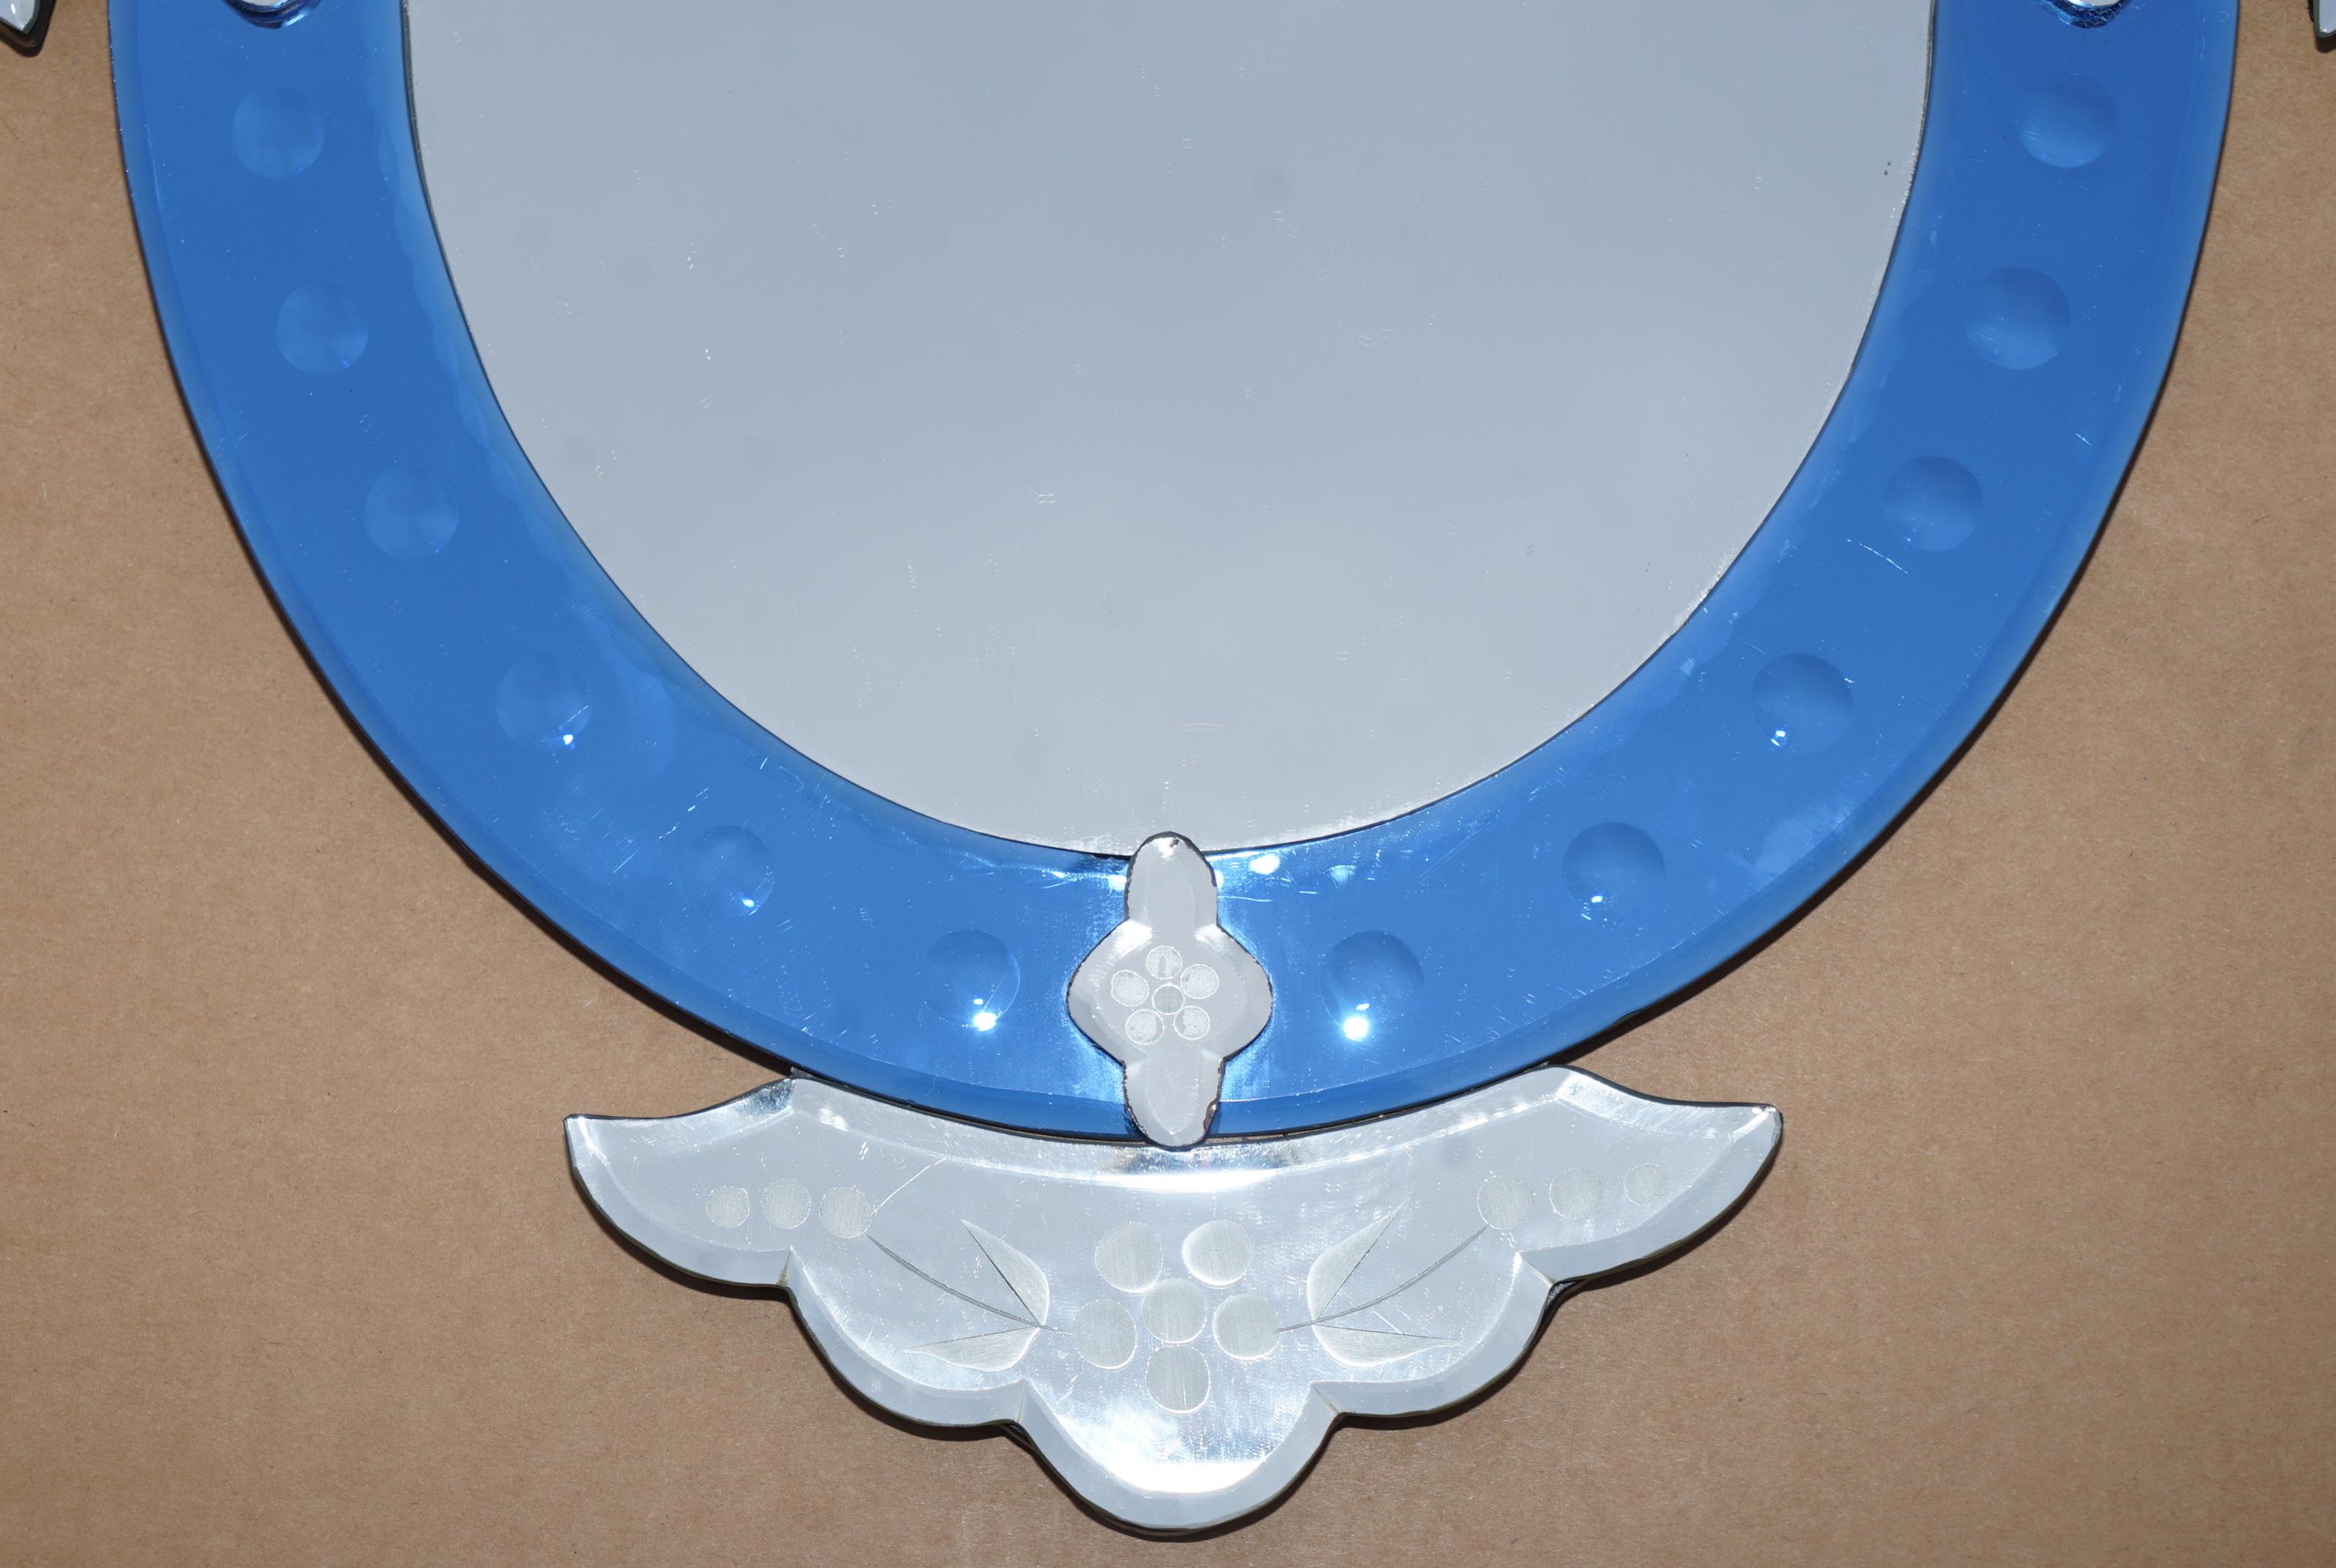 We are delighted to offer for sale this lovely vintage Cobalt blue, engraved and etched Italian Venitian wall mirror

A very good looking and decorative mirror, it has Cobalt blue panels which first came to England in the Victorian era in small